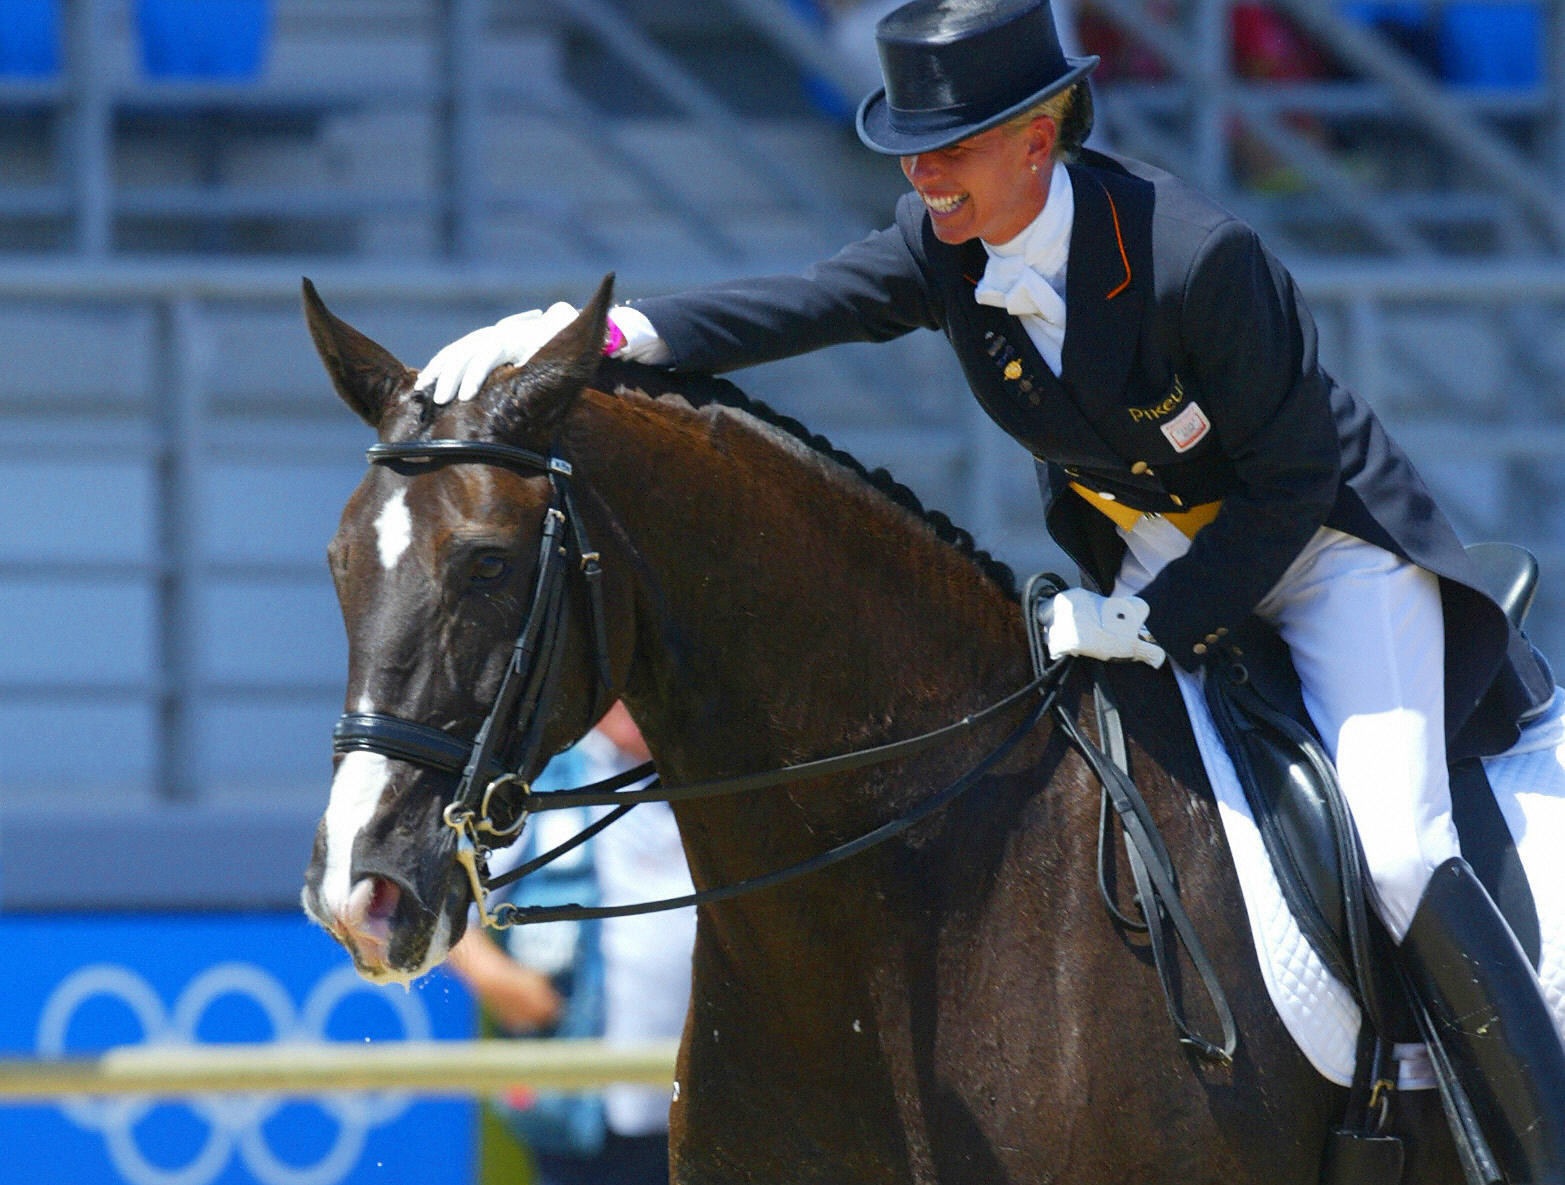 Double Olympic dressage winning horse Salinero has died at the age of 28, his Dutch rider Anky van Grunsven has announced ©Getty Images